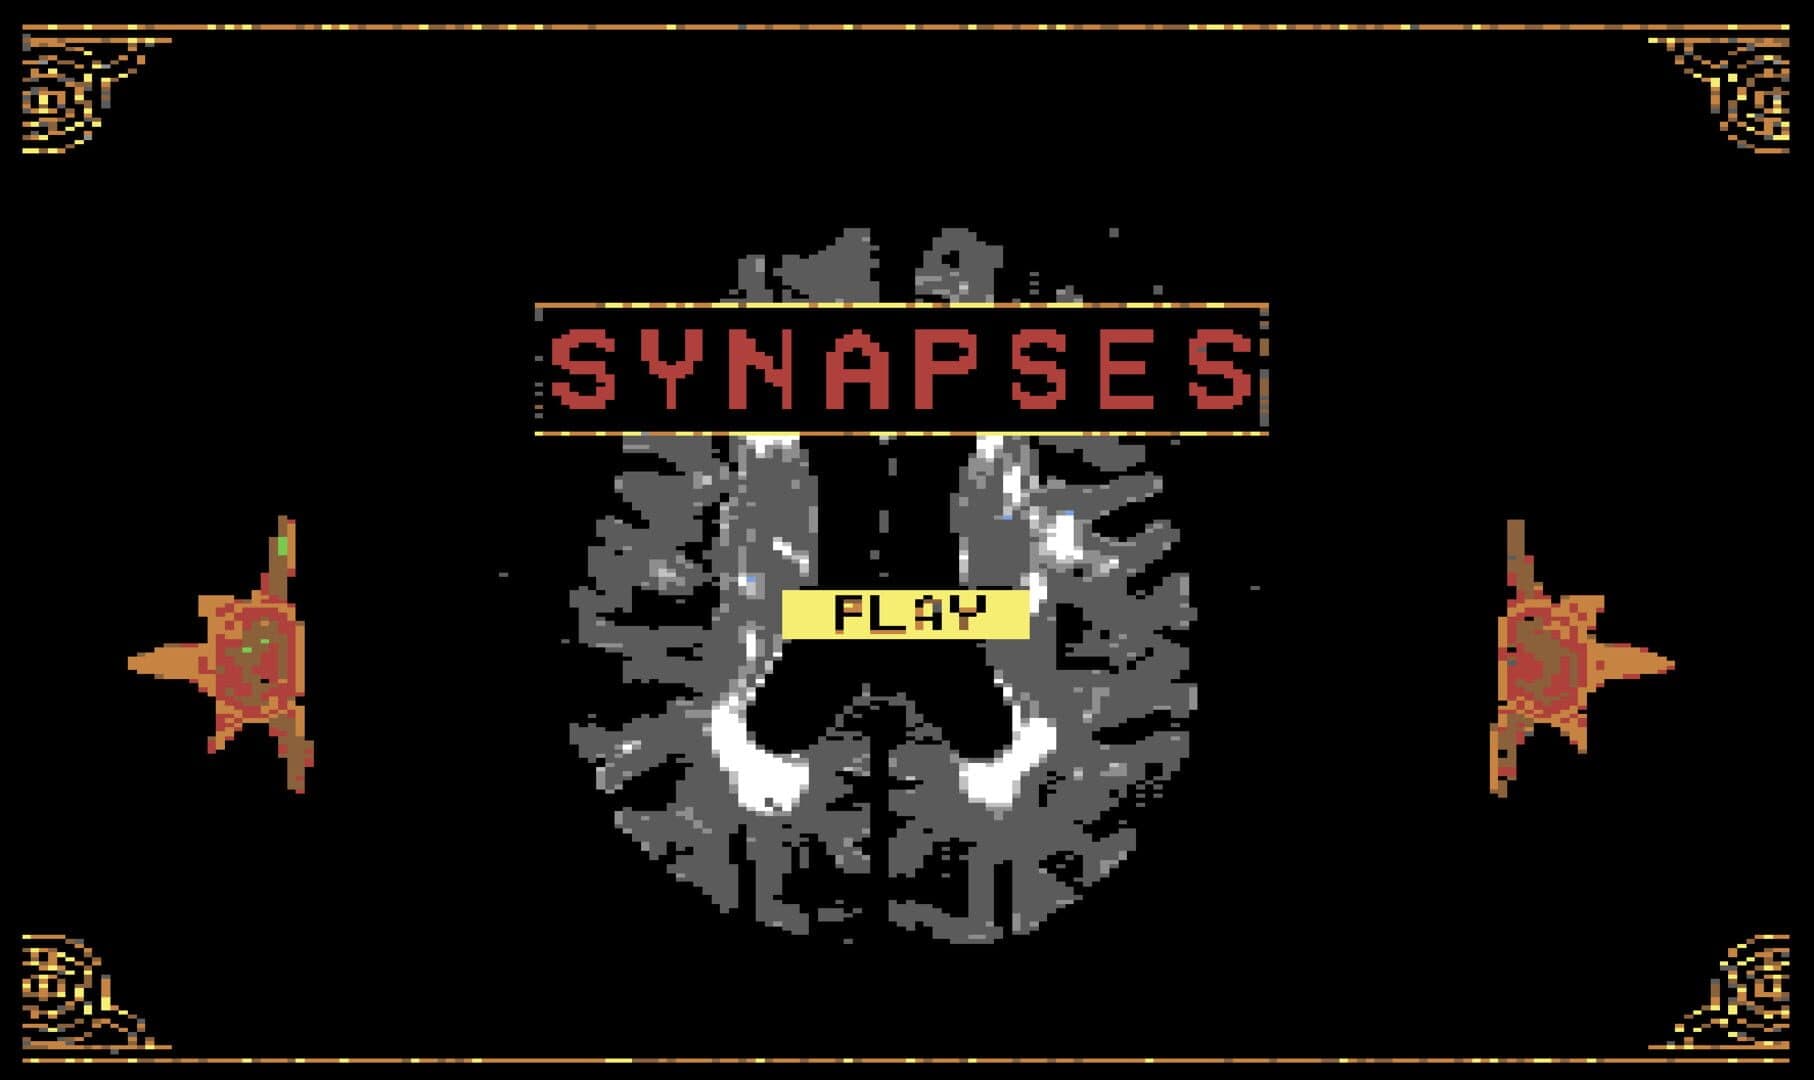 Synapses Image